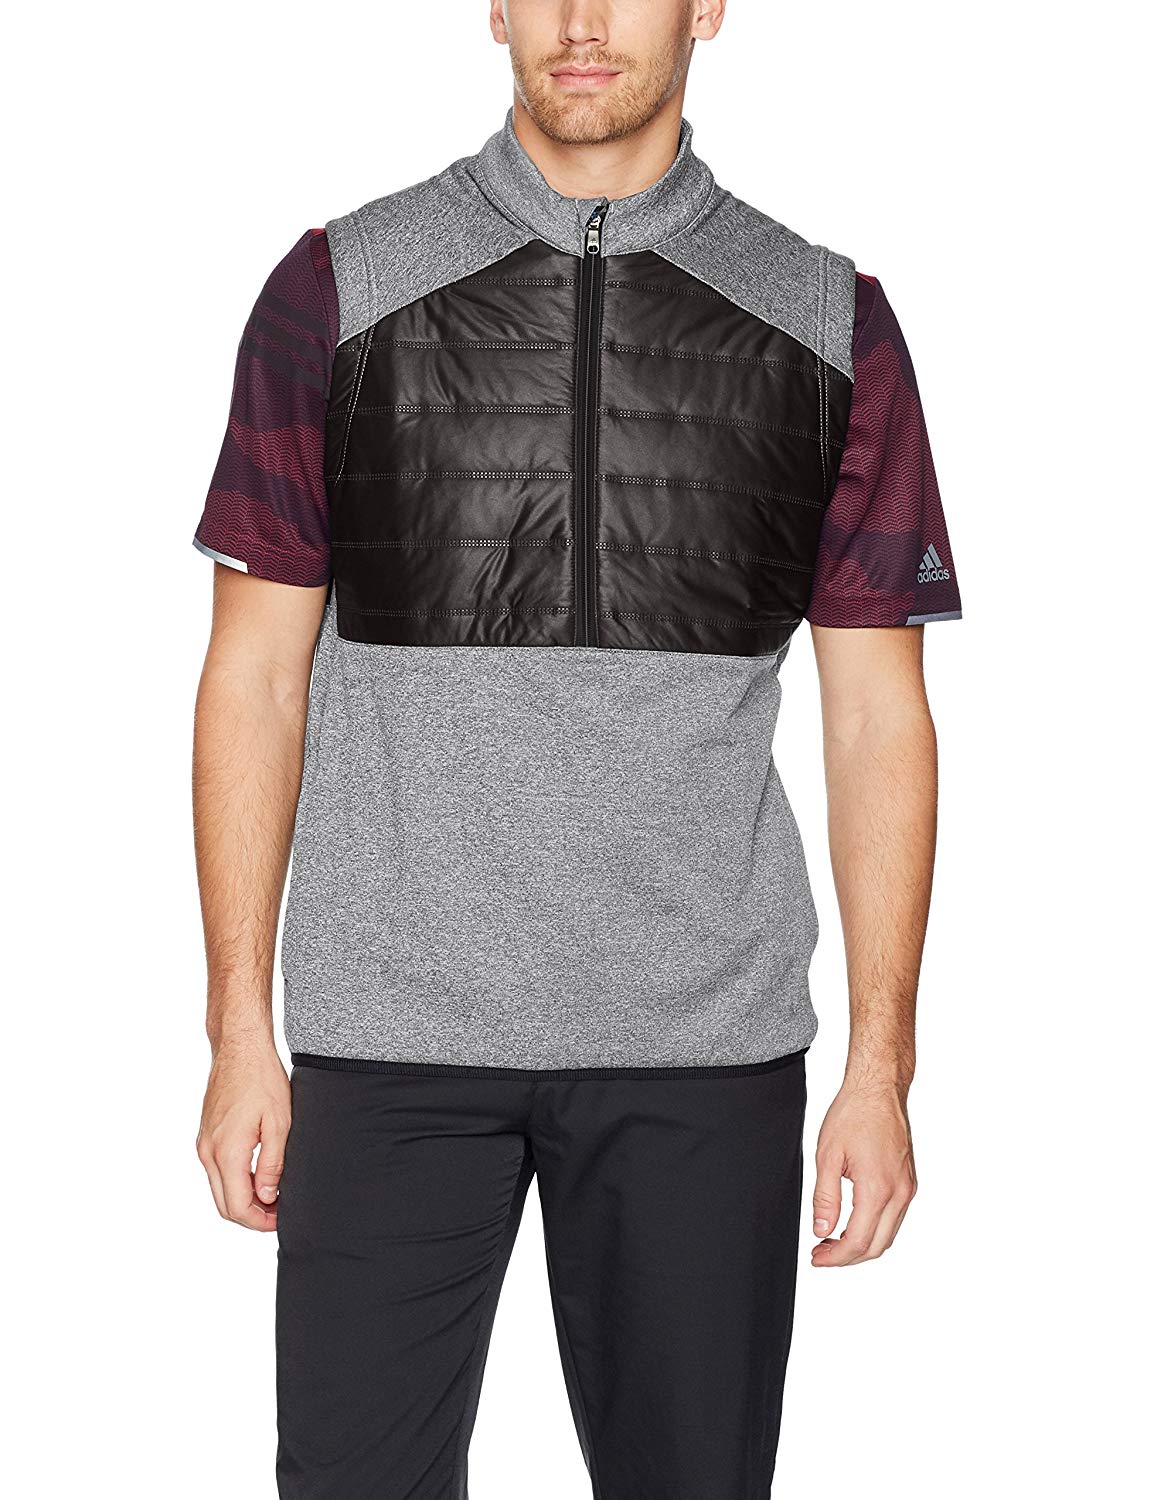 Adidas Mens Climaheat Competition Quilted Half Zip Golf Vests